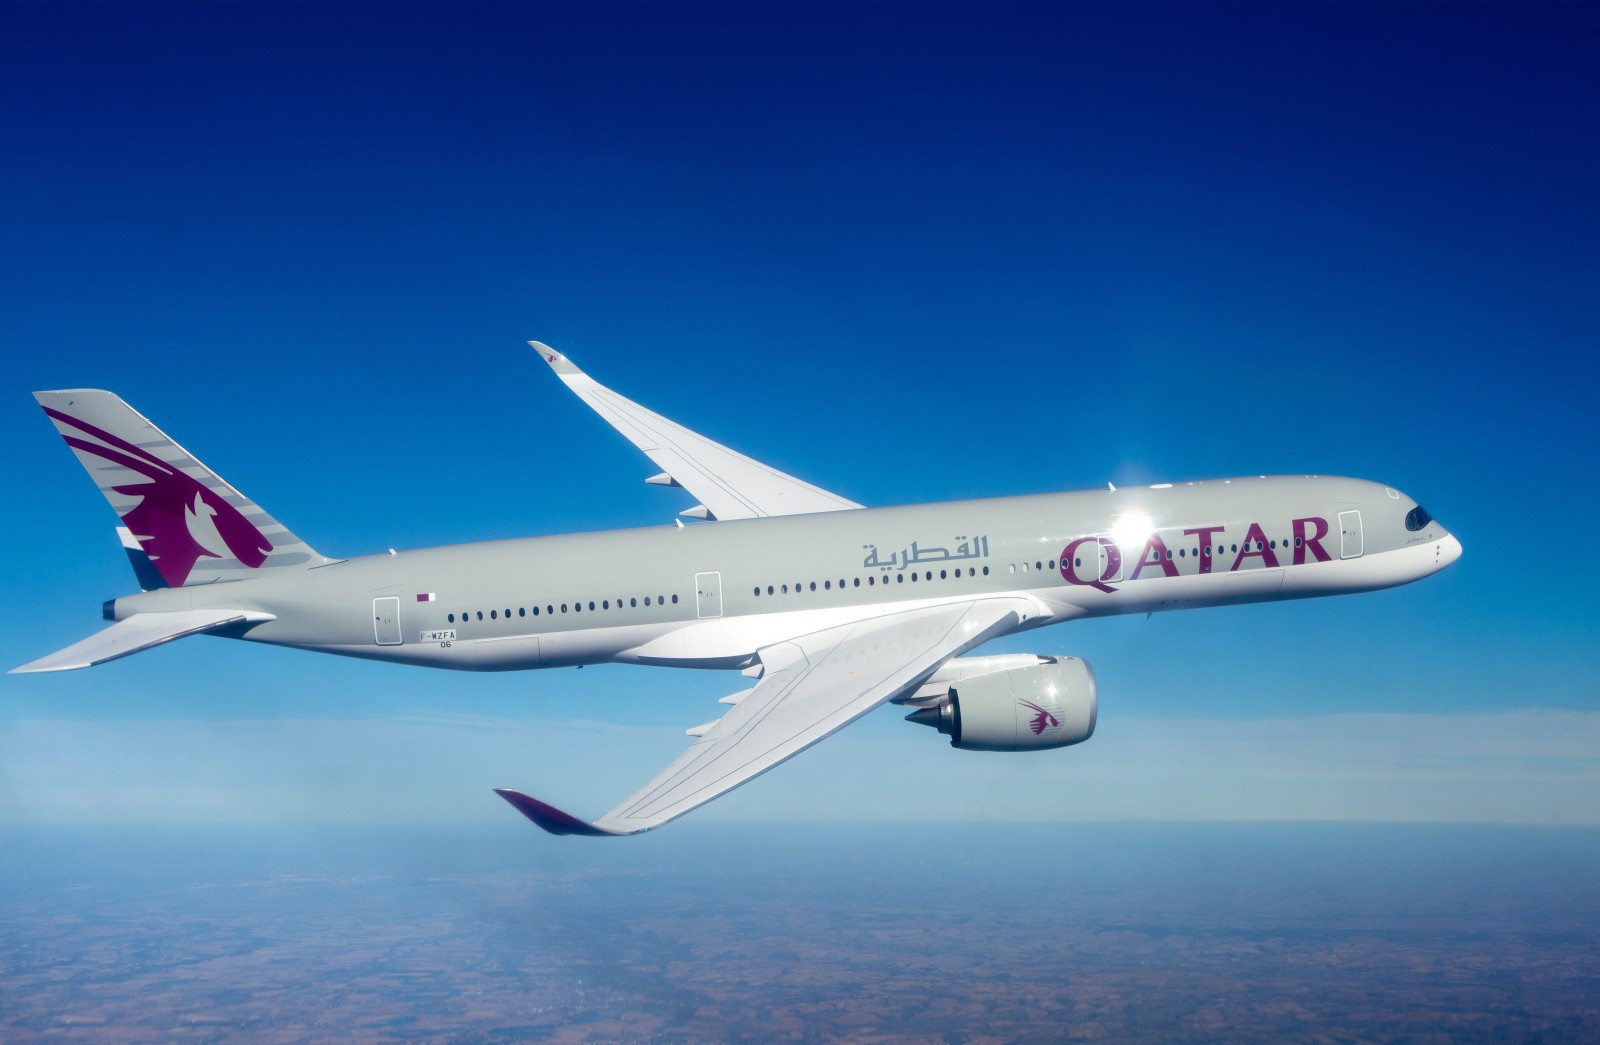 Qatar Airways increases services to US destinations - Airline Ratings